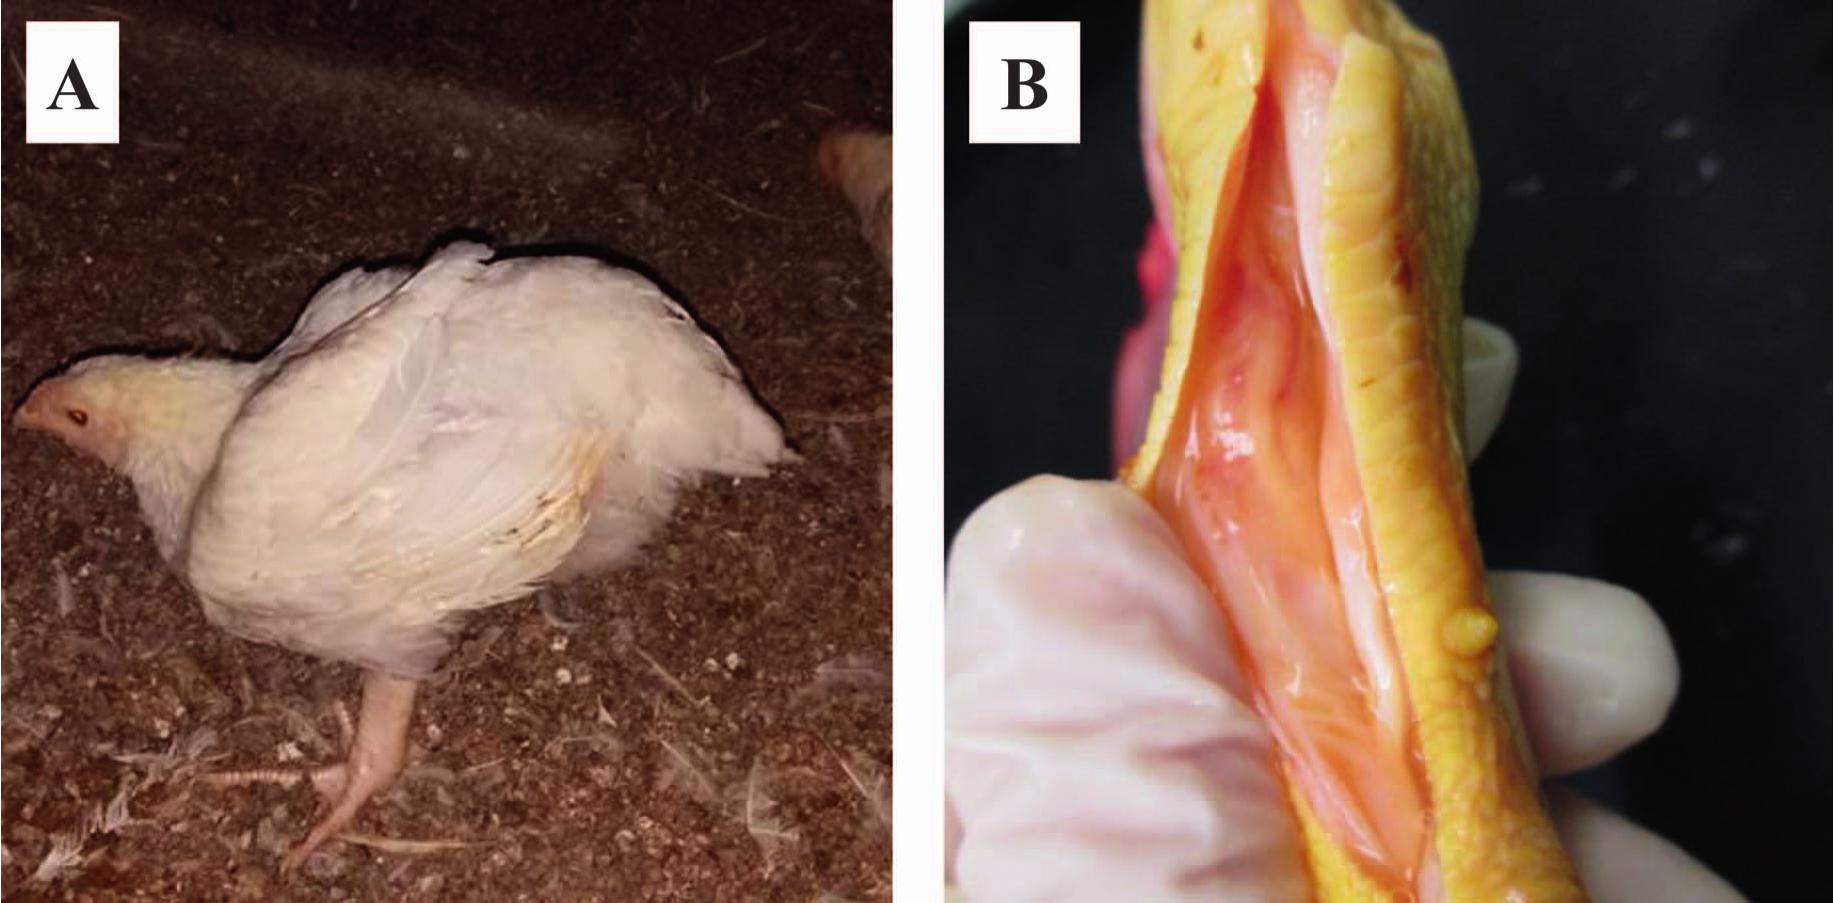 a. The heart of a 10-day-old broiler chicken, showing pericarditis and